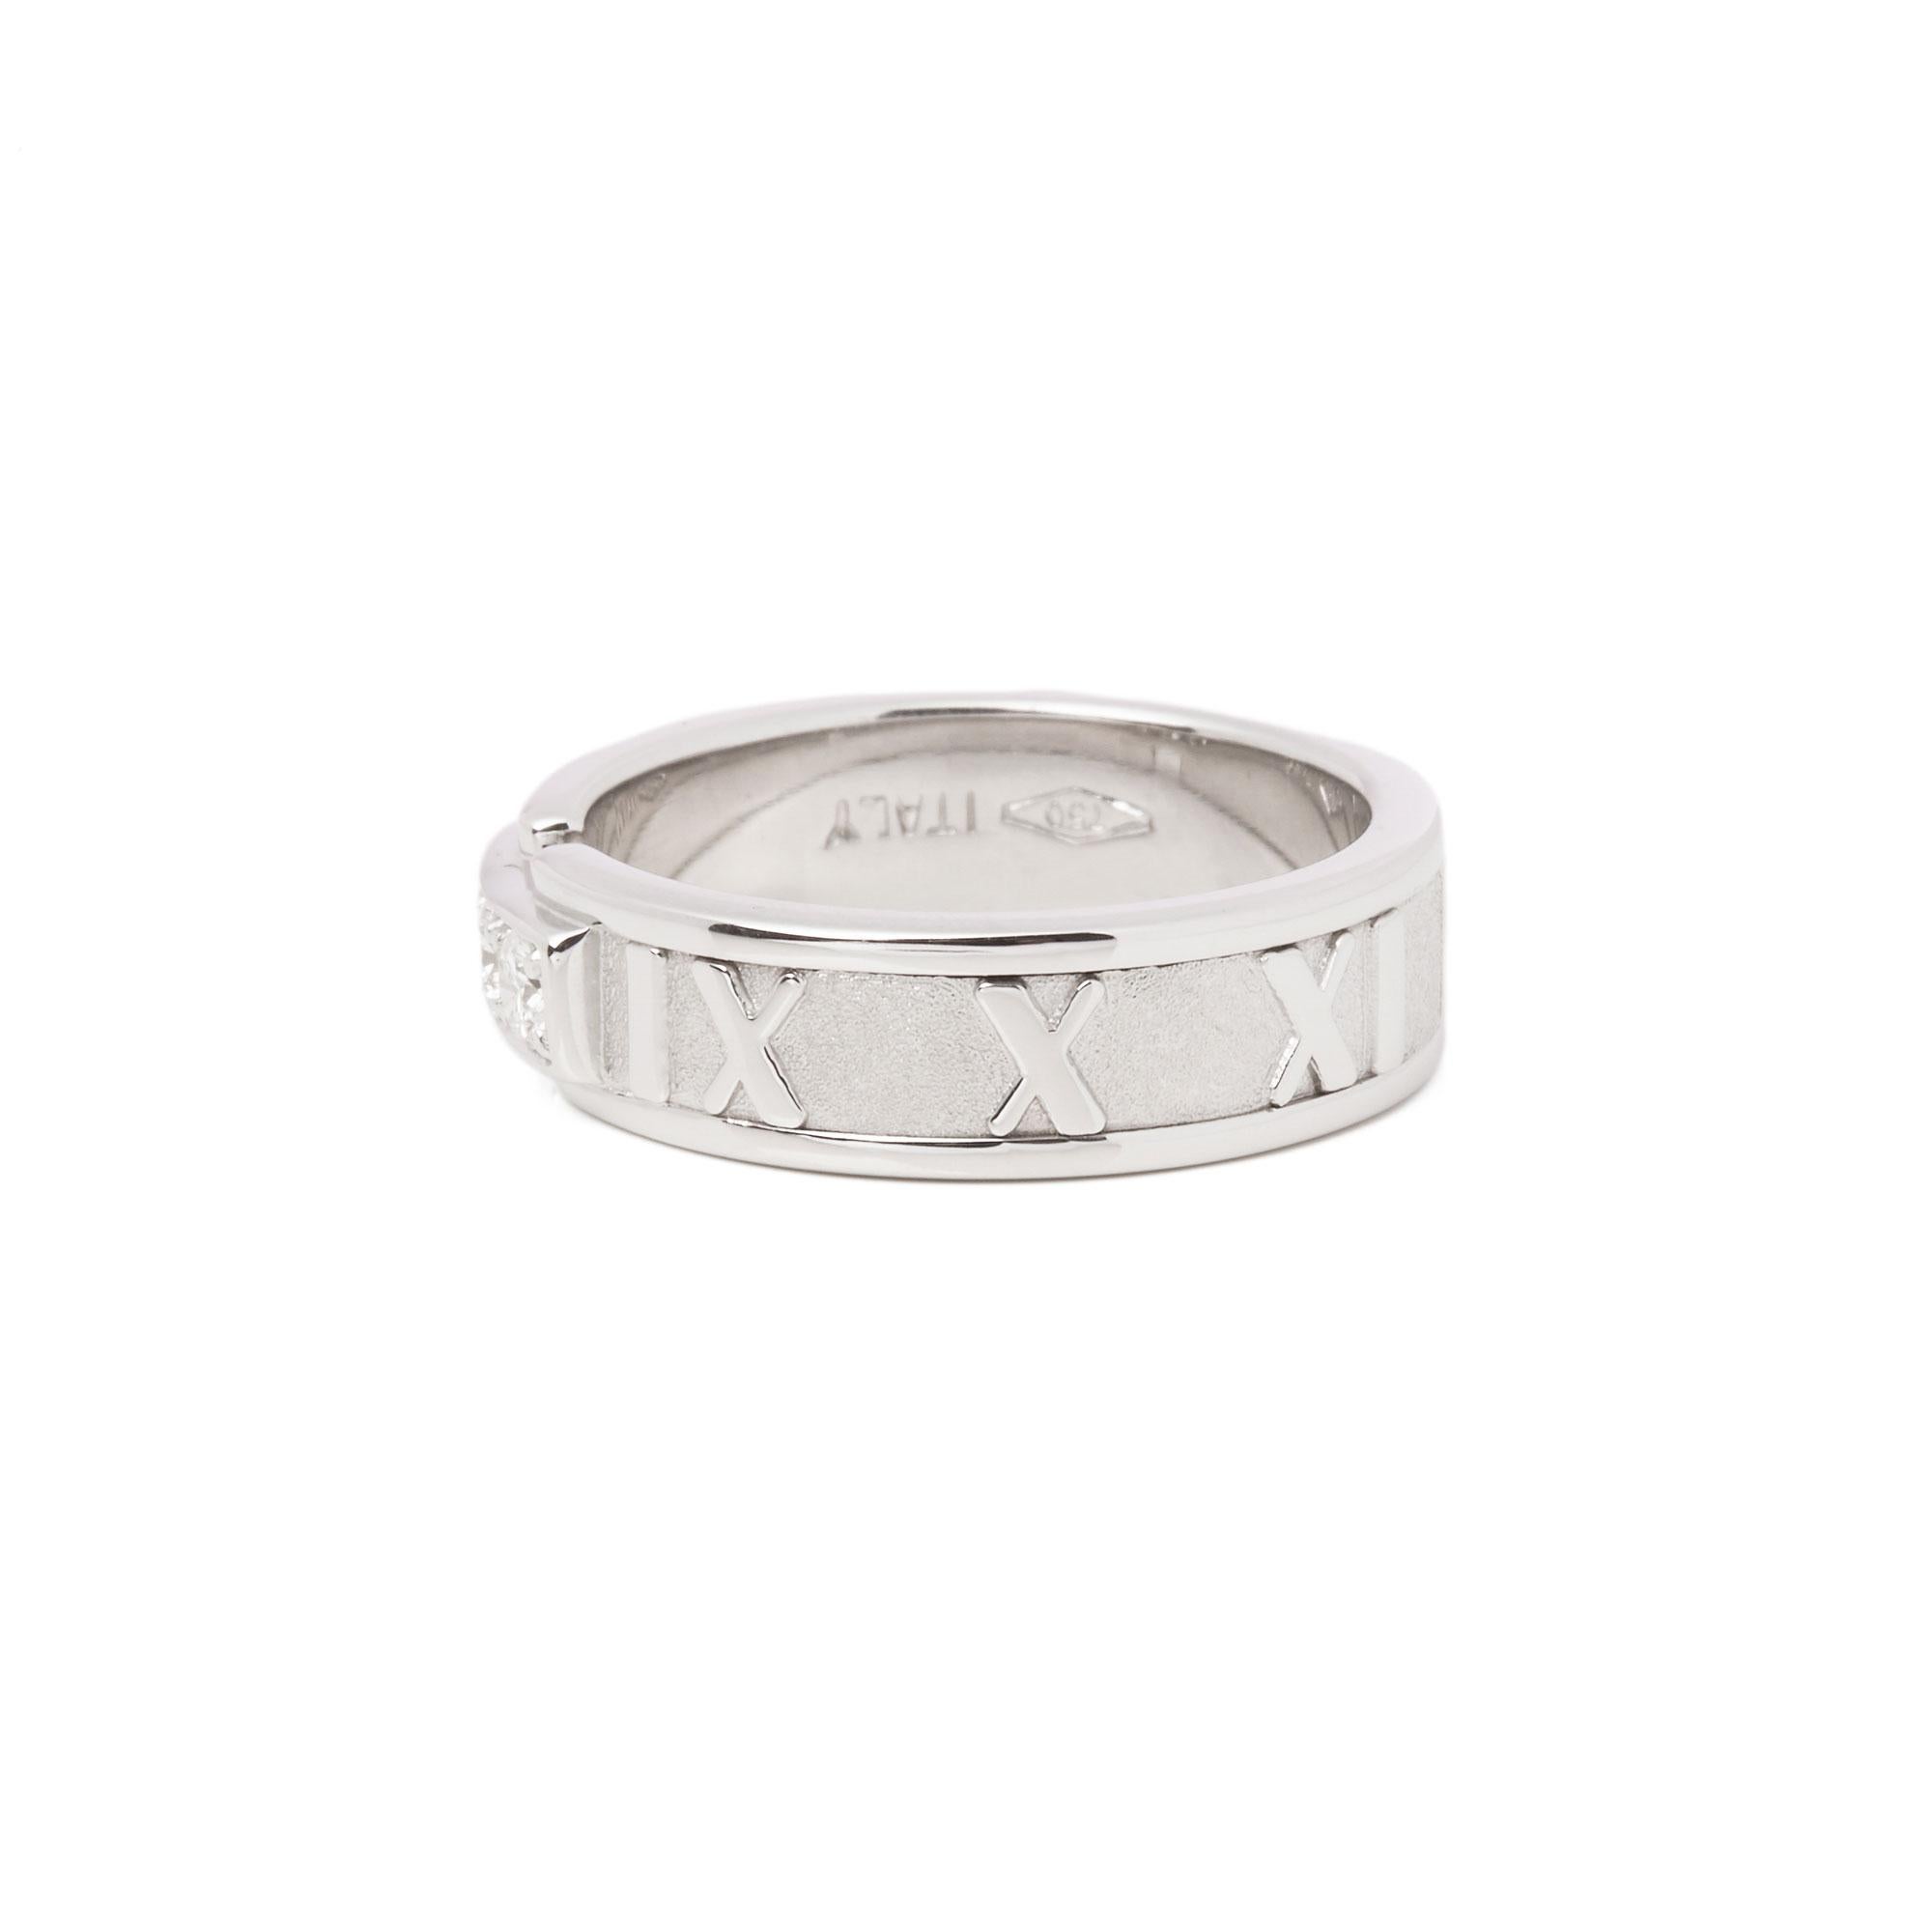 This ring by Tiffany & Co is from their Atlas collection and features 3 round brilliant cut diamonds set within an 18ct white gold band ring. The band features the iconic Roman numeral design accentuated by the contrast of highly polished and